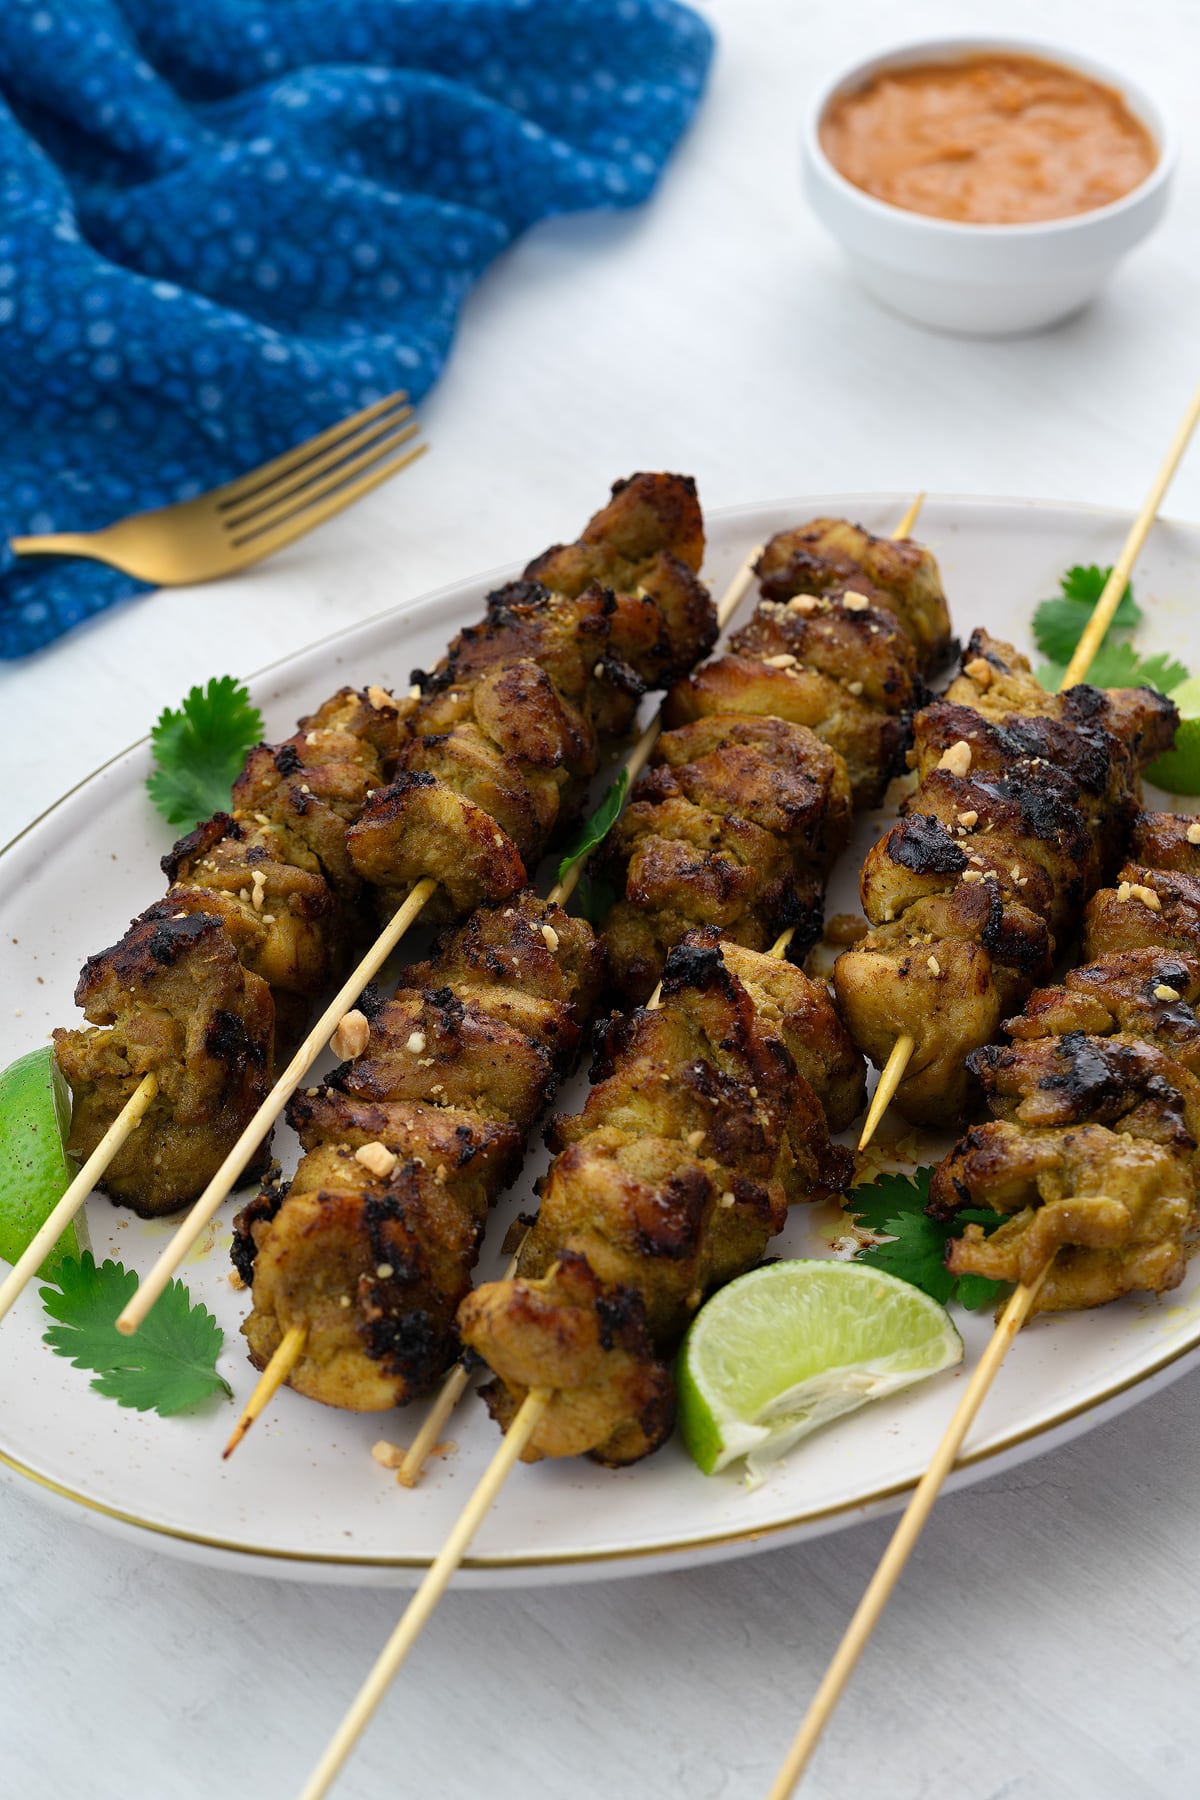 Homemade chicken satay on skewers, served on a plate garnished with lime wedges and cilantro leaves. Beside the plate, there is a golden fork, a blue towel, and a cup of peanut sauce.